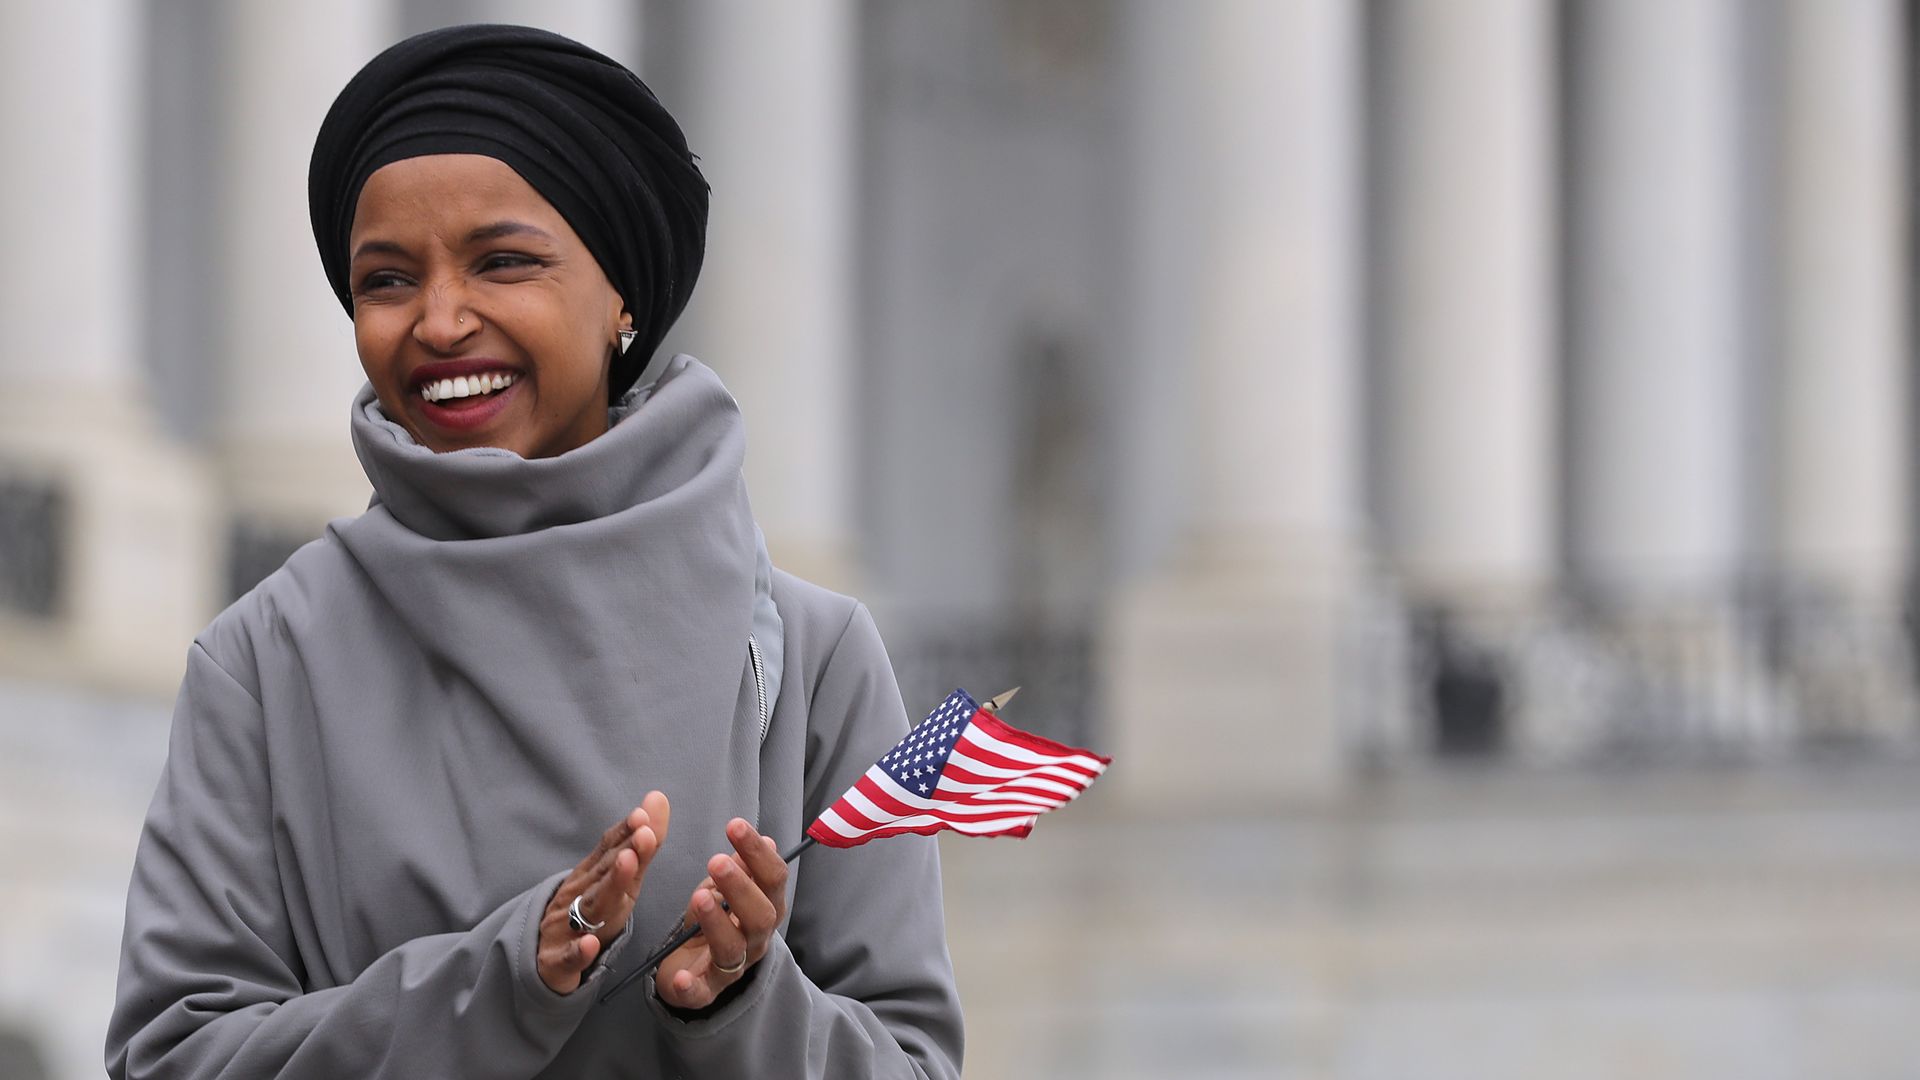 In this image, Rep. Omar holds a small American flag in one hand while clapping. 